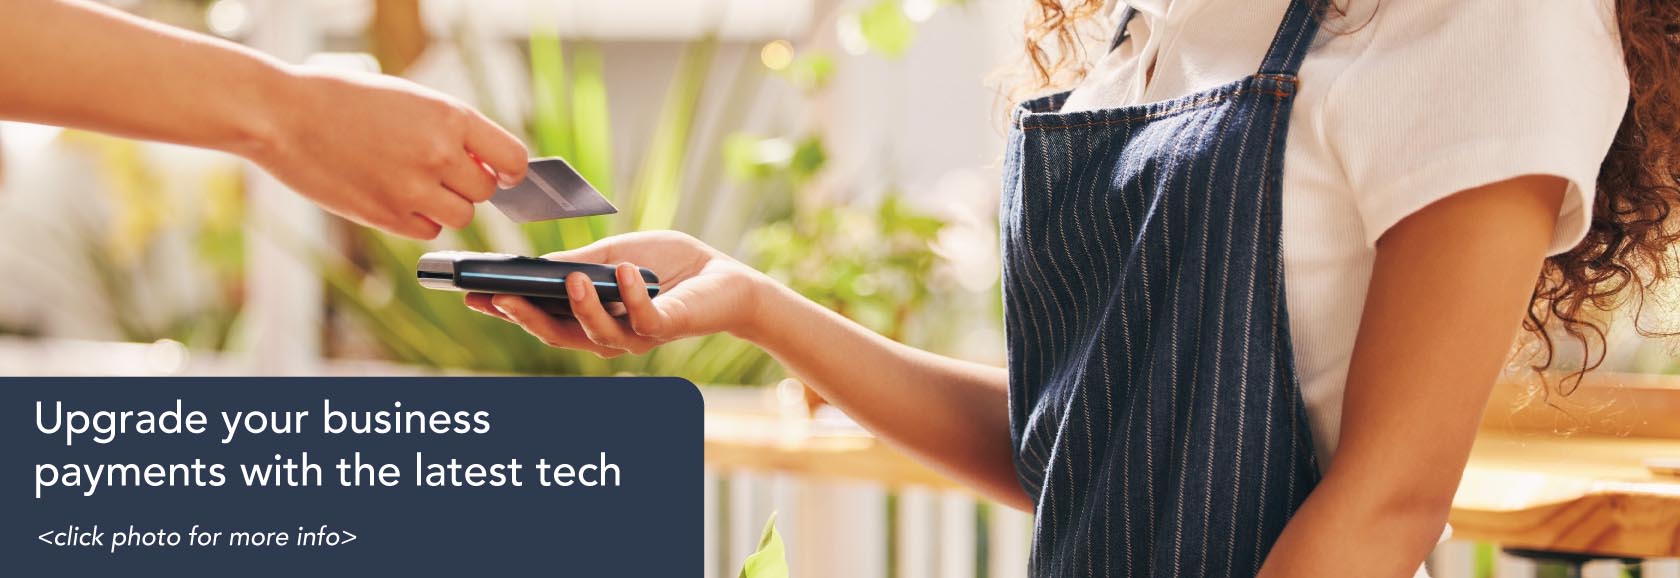 Upgrade your Business Payments with the Latest Tech banner image